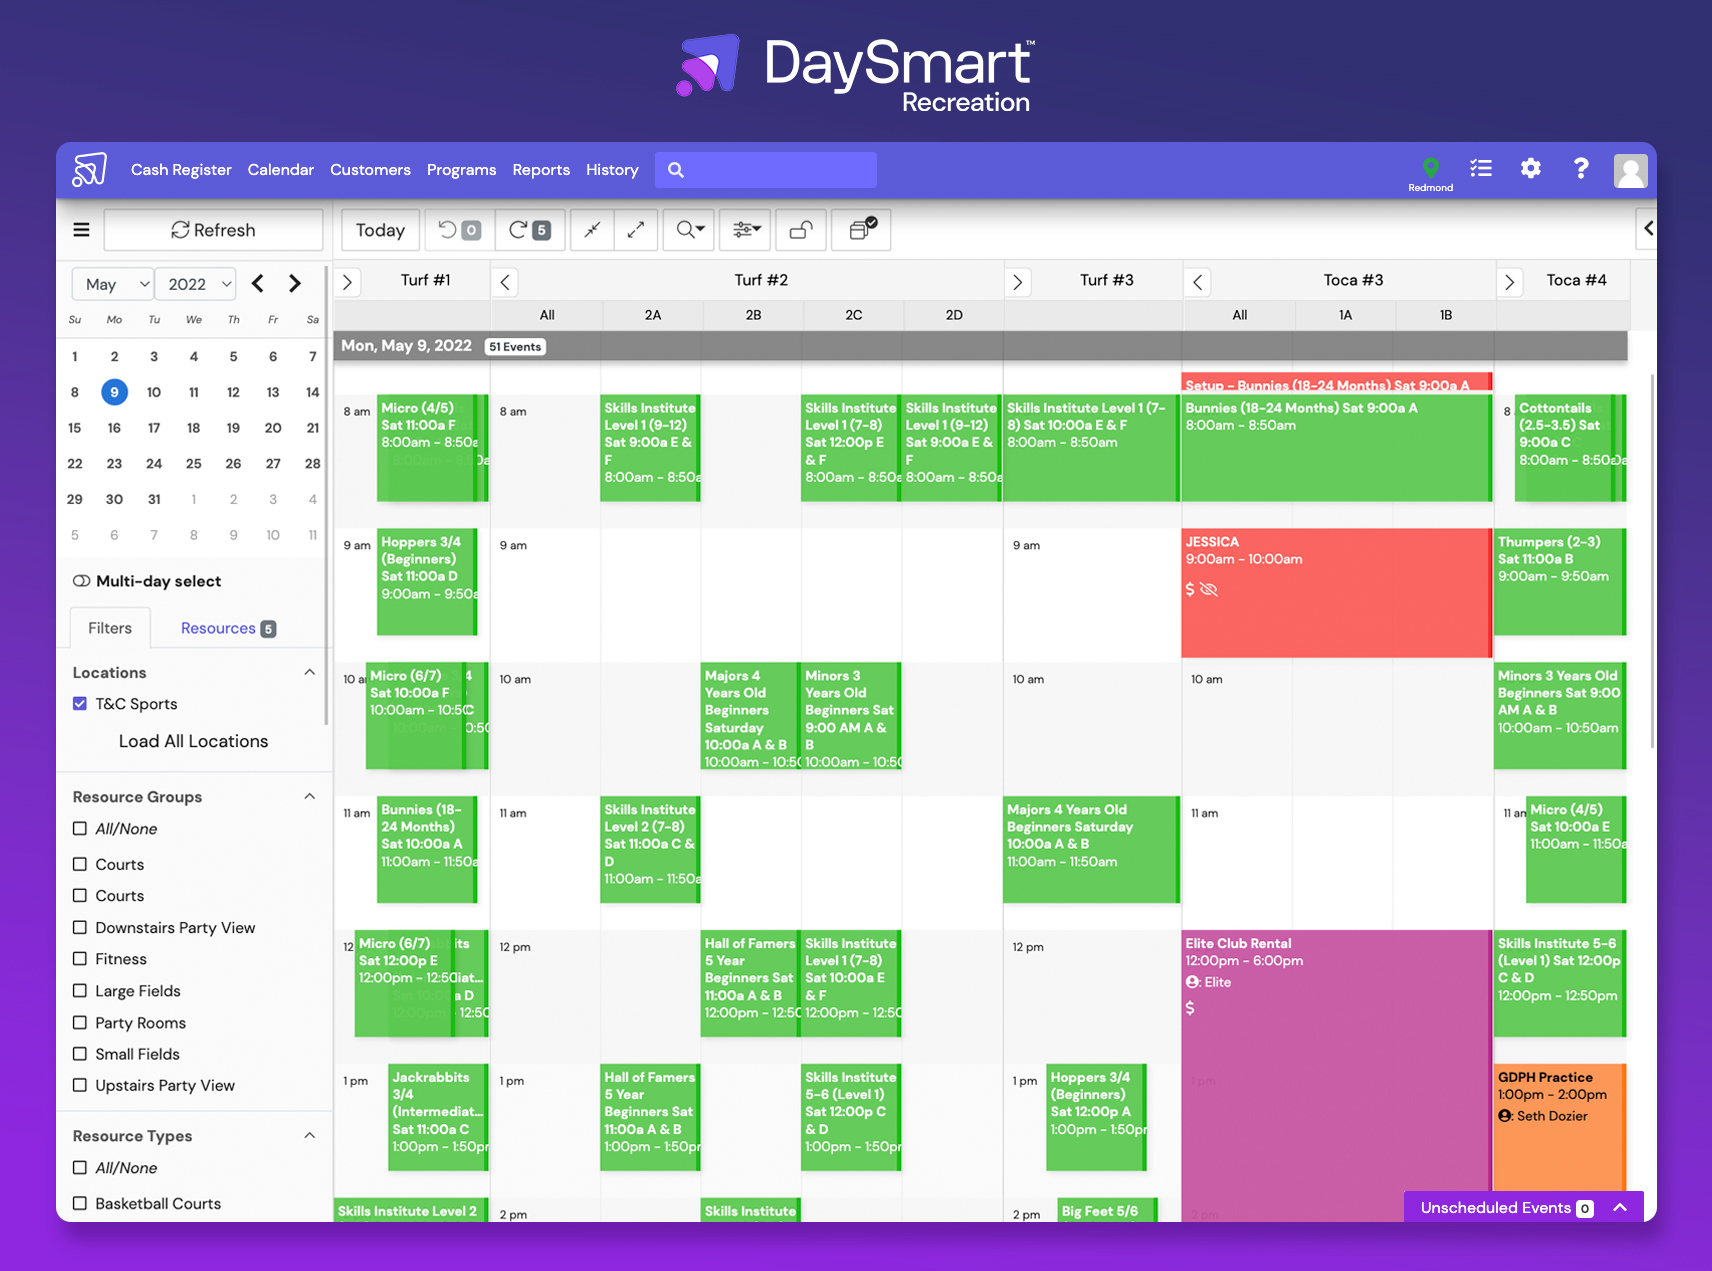 Build calendars for your community. With a drag and drop calendar that makes scheduling simple, you can build leagues, book facilities, and confirm rentals within one calendar.